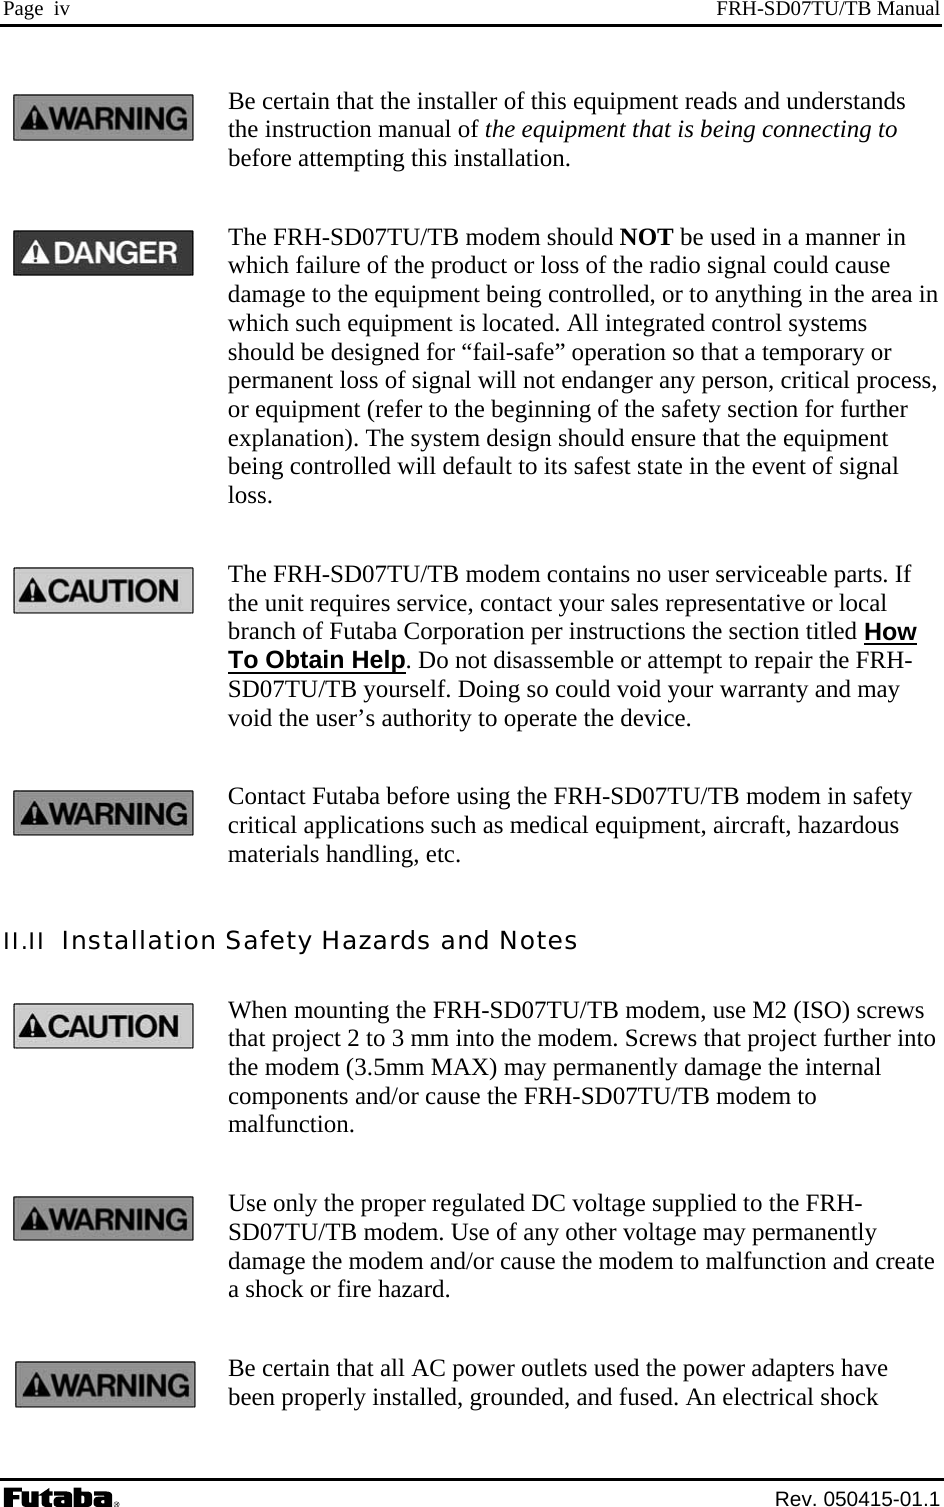 Page  iv  FRH-SD07TU/TB Manual Be certain that the installer of this equipment reads and understands the instruction manual of the equipment that is being connecting to before attempting this installation. The FRH-SD07TU/TB modem should NOT be used in a manner in which failure of the product or loss of the radio signal could cause damage to the equipment being controlled, or to anything in the area in which such equipment is located. All integrated control systems should be designed for “fail-safe” operation so that a temporary or permanent loss of signal will not endanger any person, critical process, or equipment (refer to the beginning of the safety section for further explanation). The system design should ensure that the equipment being controlled will default to its safest state in the event of signal loss. The FRH-SD07TU/TB modem contains no user serviceable parts. If the unit requires service, contact your sales representative or local branch of Futaba Corporation per instructions the section titled How To Obtain Help. Do not disassemble or attempt to repair the FRH-SD07TU/TB yourself. Doing so could void your warranty and may void the user’s authority to operate the device. Contact Futaba before using the FRH-SD07TU/TB modem in safety critical applications such as medical equipment, aircraft, hazardous materials handling, etc. II.II  Installation Safety Hazards and Notes When mounting the FRH-SD07TU/TB modem, use M2 (ISO) screws that project 2 to 3 mm into the modem. Screws that project further into the modem (3.5mm MAX) may permanently damage the internal components and/or cause the FRH-SD07TU/TB modem to malfunction. Use only the proper regulated DC voltage supplied to the FRH-SD07TU/TB modem. Use of any other voltage may permanently damage the modem and/or cause the modem to malfunction and create a shock or fire hazard. Be certain that all AC power outlets used the power adapters have been properly installed, grounded, and fused. An electrical shock  Rev. 050415-01.1 